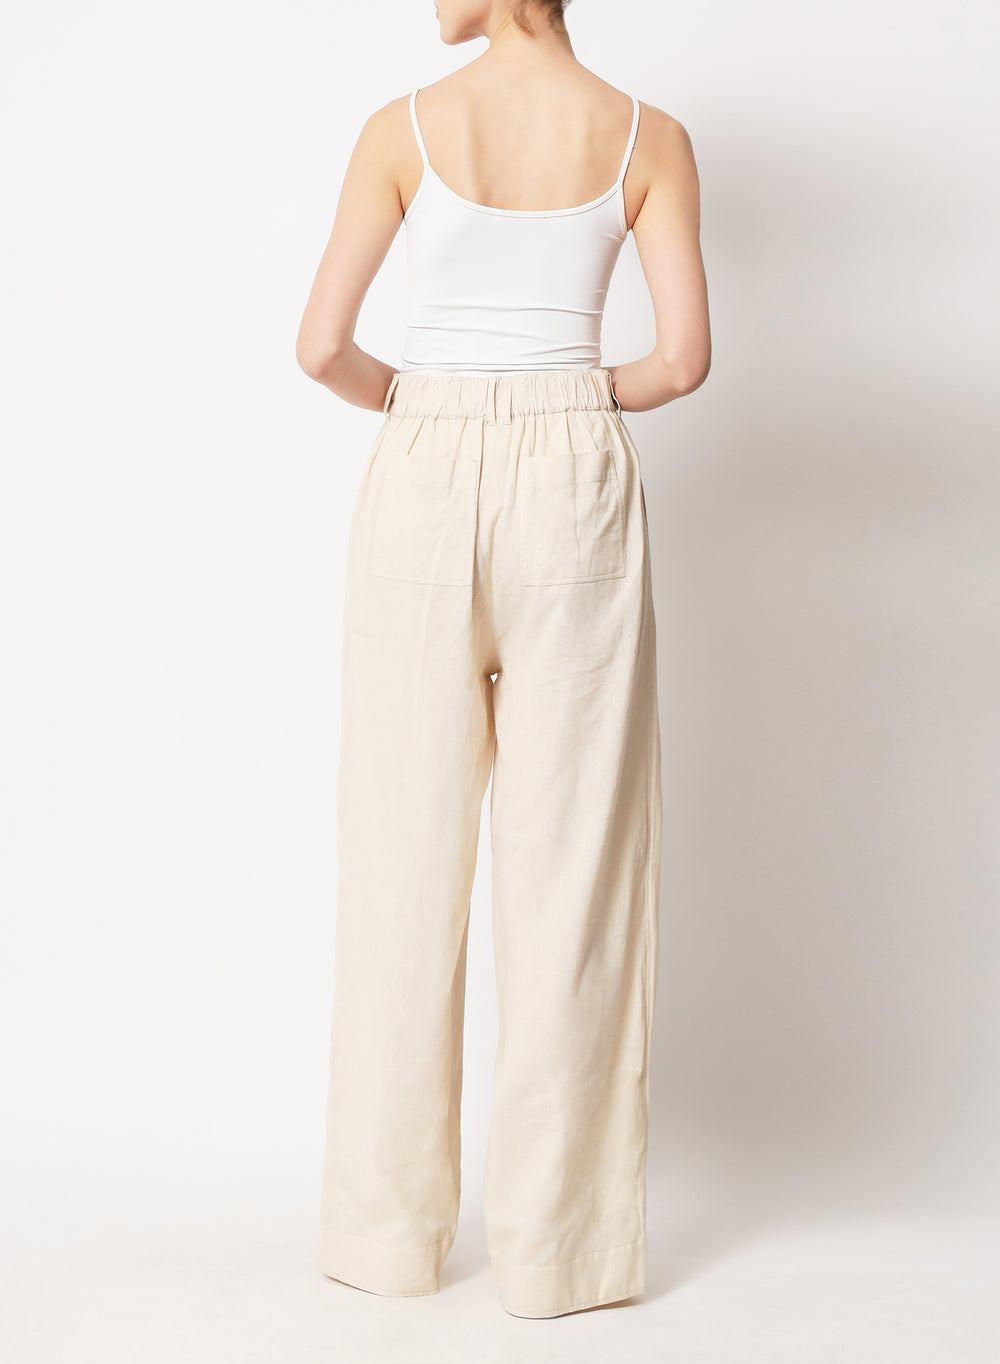 Roma Pant - Solid Ivory